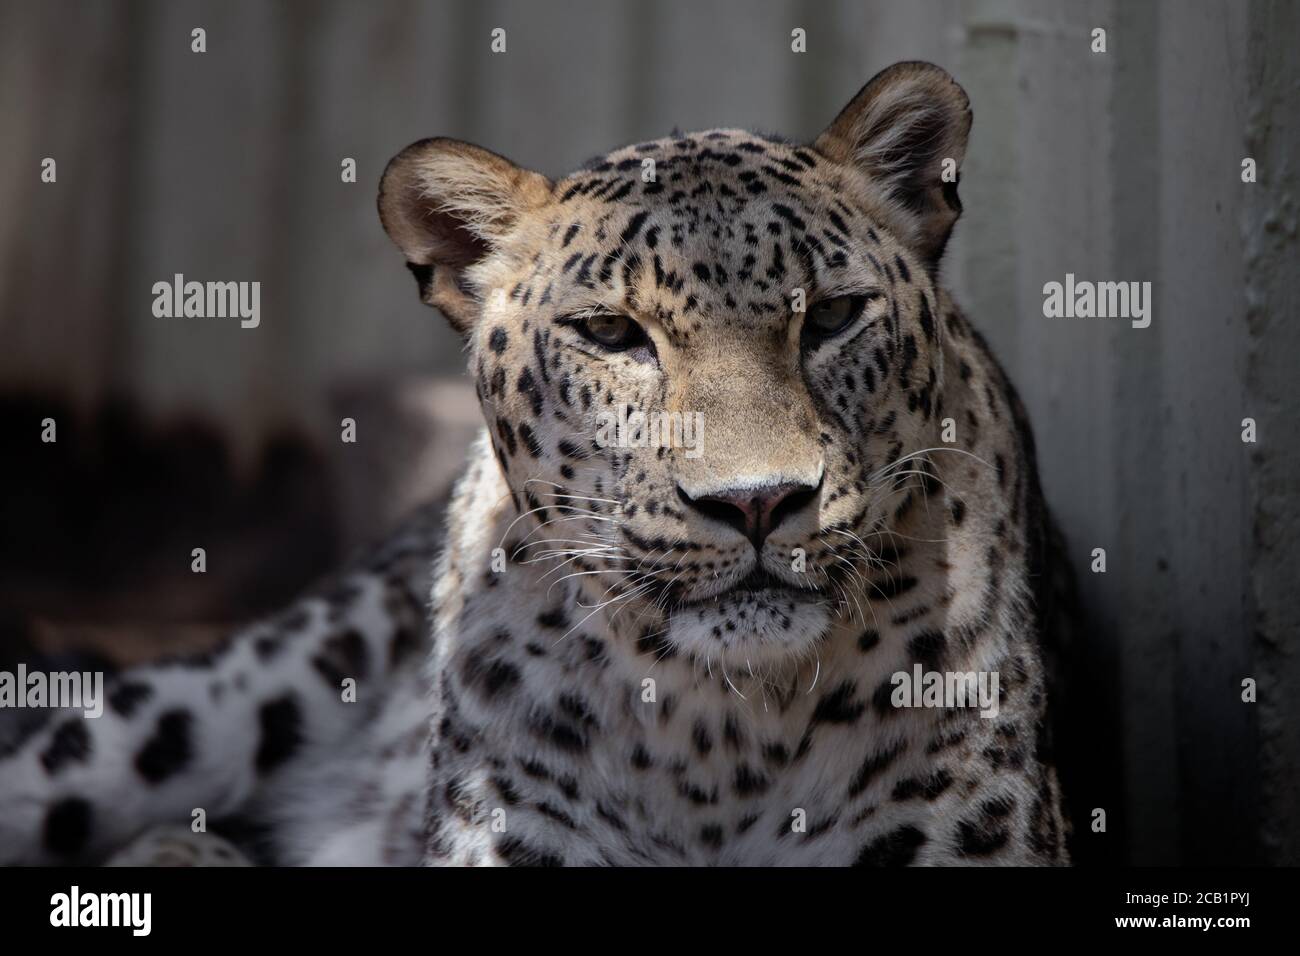 Close up facial portrait of a relaxed adult Asian leopard Stock Photo